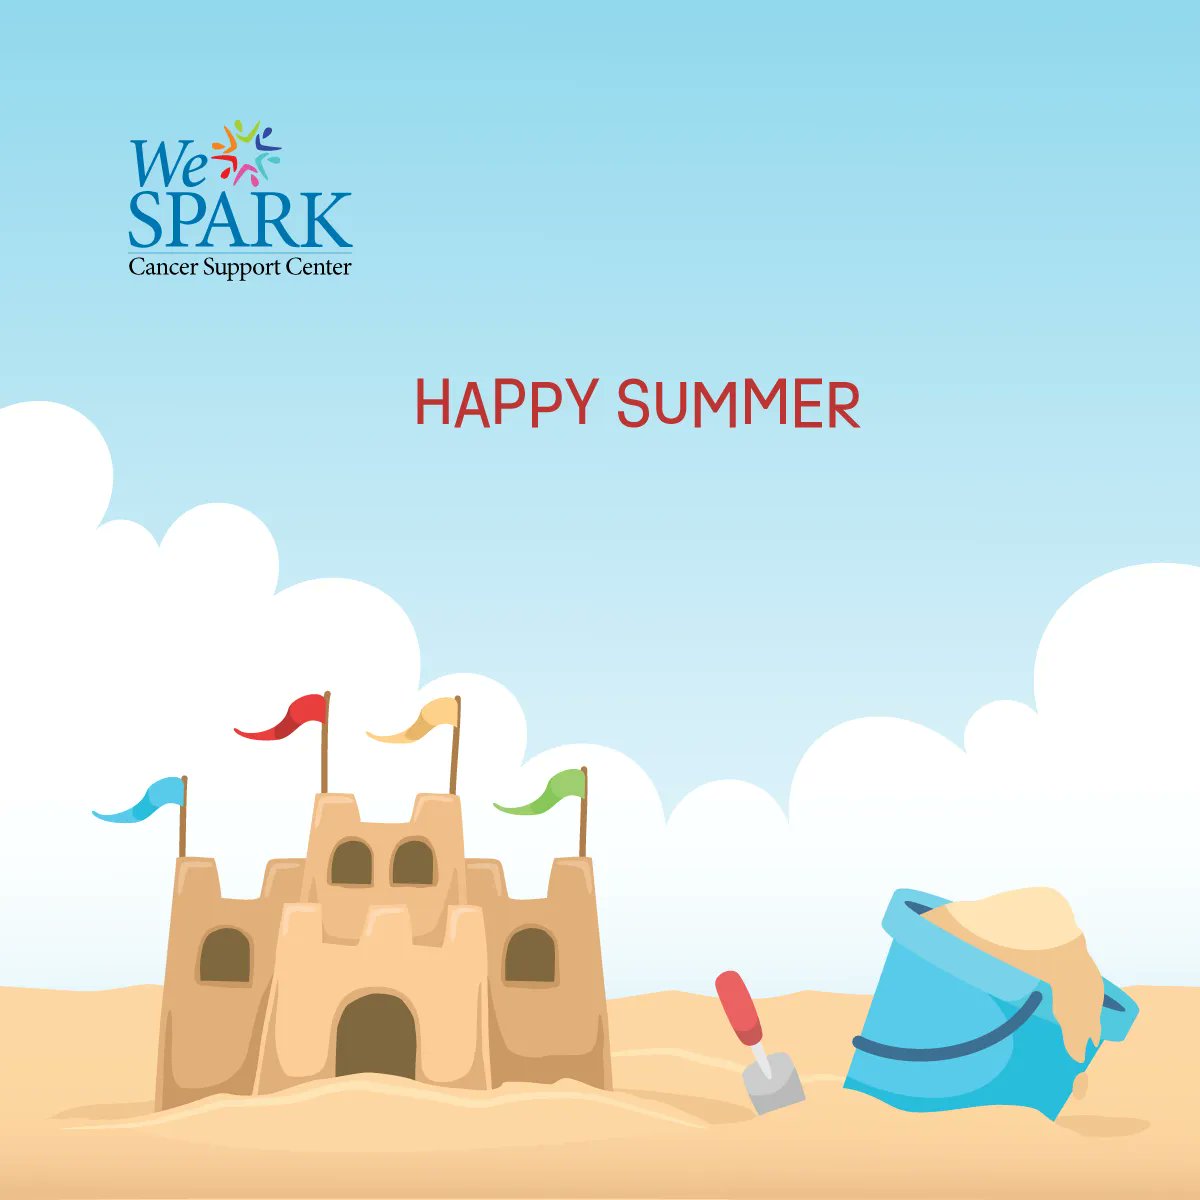 Happy Summer, Happy Solstice! Are you making any season plans that include a bit of sunshine?

#WeSPARK #cancersupport #sunshine #firstdayofsummer #happysummer #hellosummer #summersolstice #happysolstice